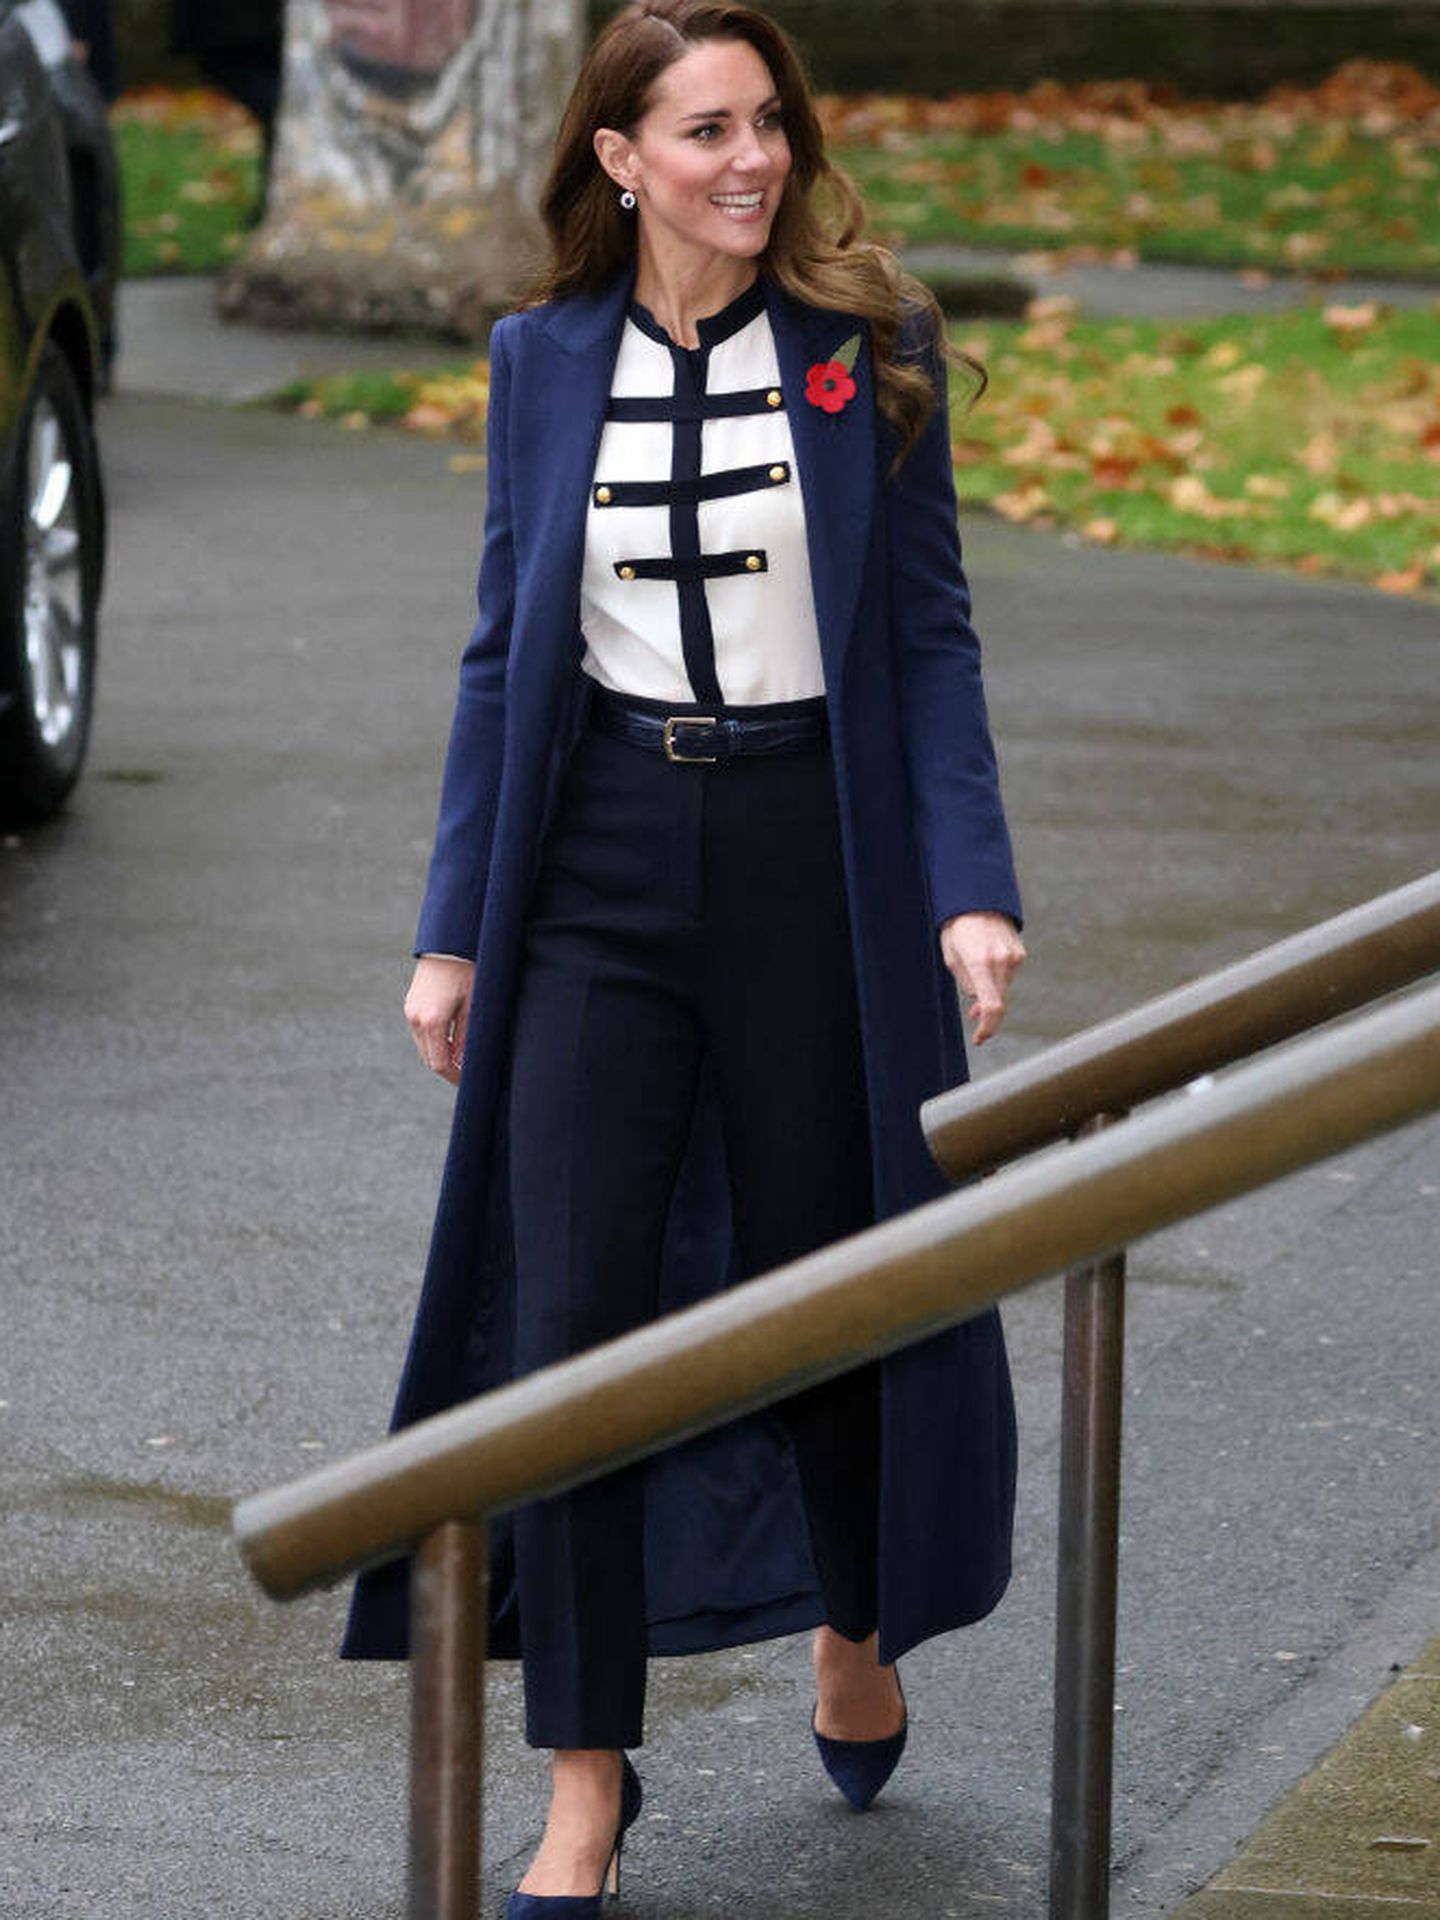 Kate, a su llegada al museo. (Tim P. Whitby/Getty Images)